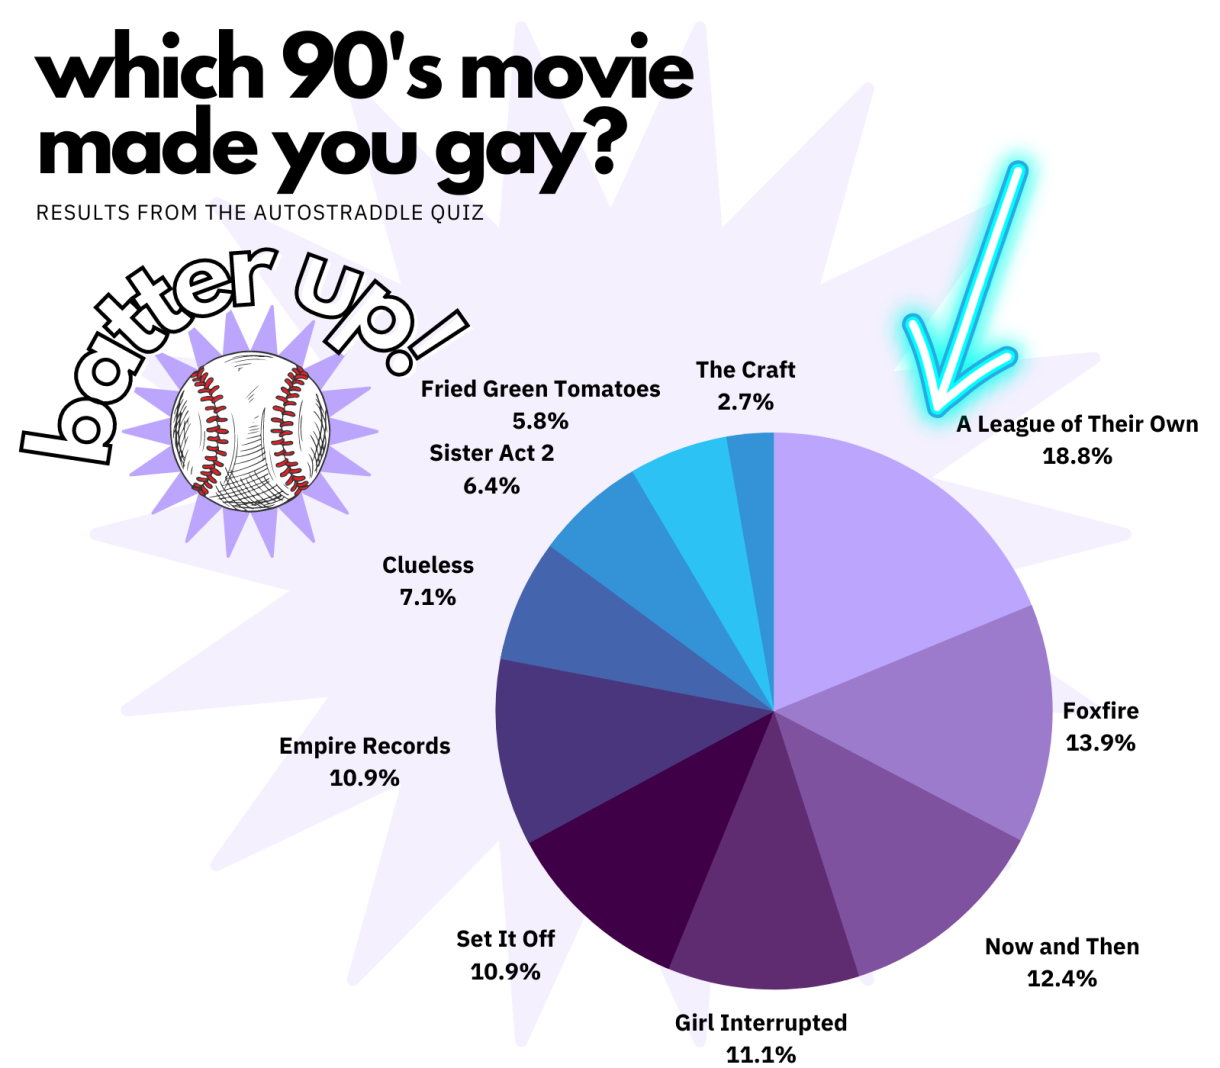 Results from the quiz "which 90's movie made you gay." 18.8% got A League of Their Own, 13.9% Foxfire, 12.4% Now and Then, 11.1% Girl Interrupted, 10.9% Set It Off, 10.9% Empire Records, 7.1% Clueless, 6.4% Sister Act 2, 5.8% Fried Green Tomatoes, 2.7% The Craft